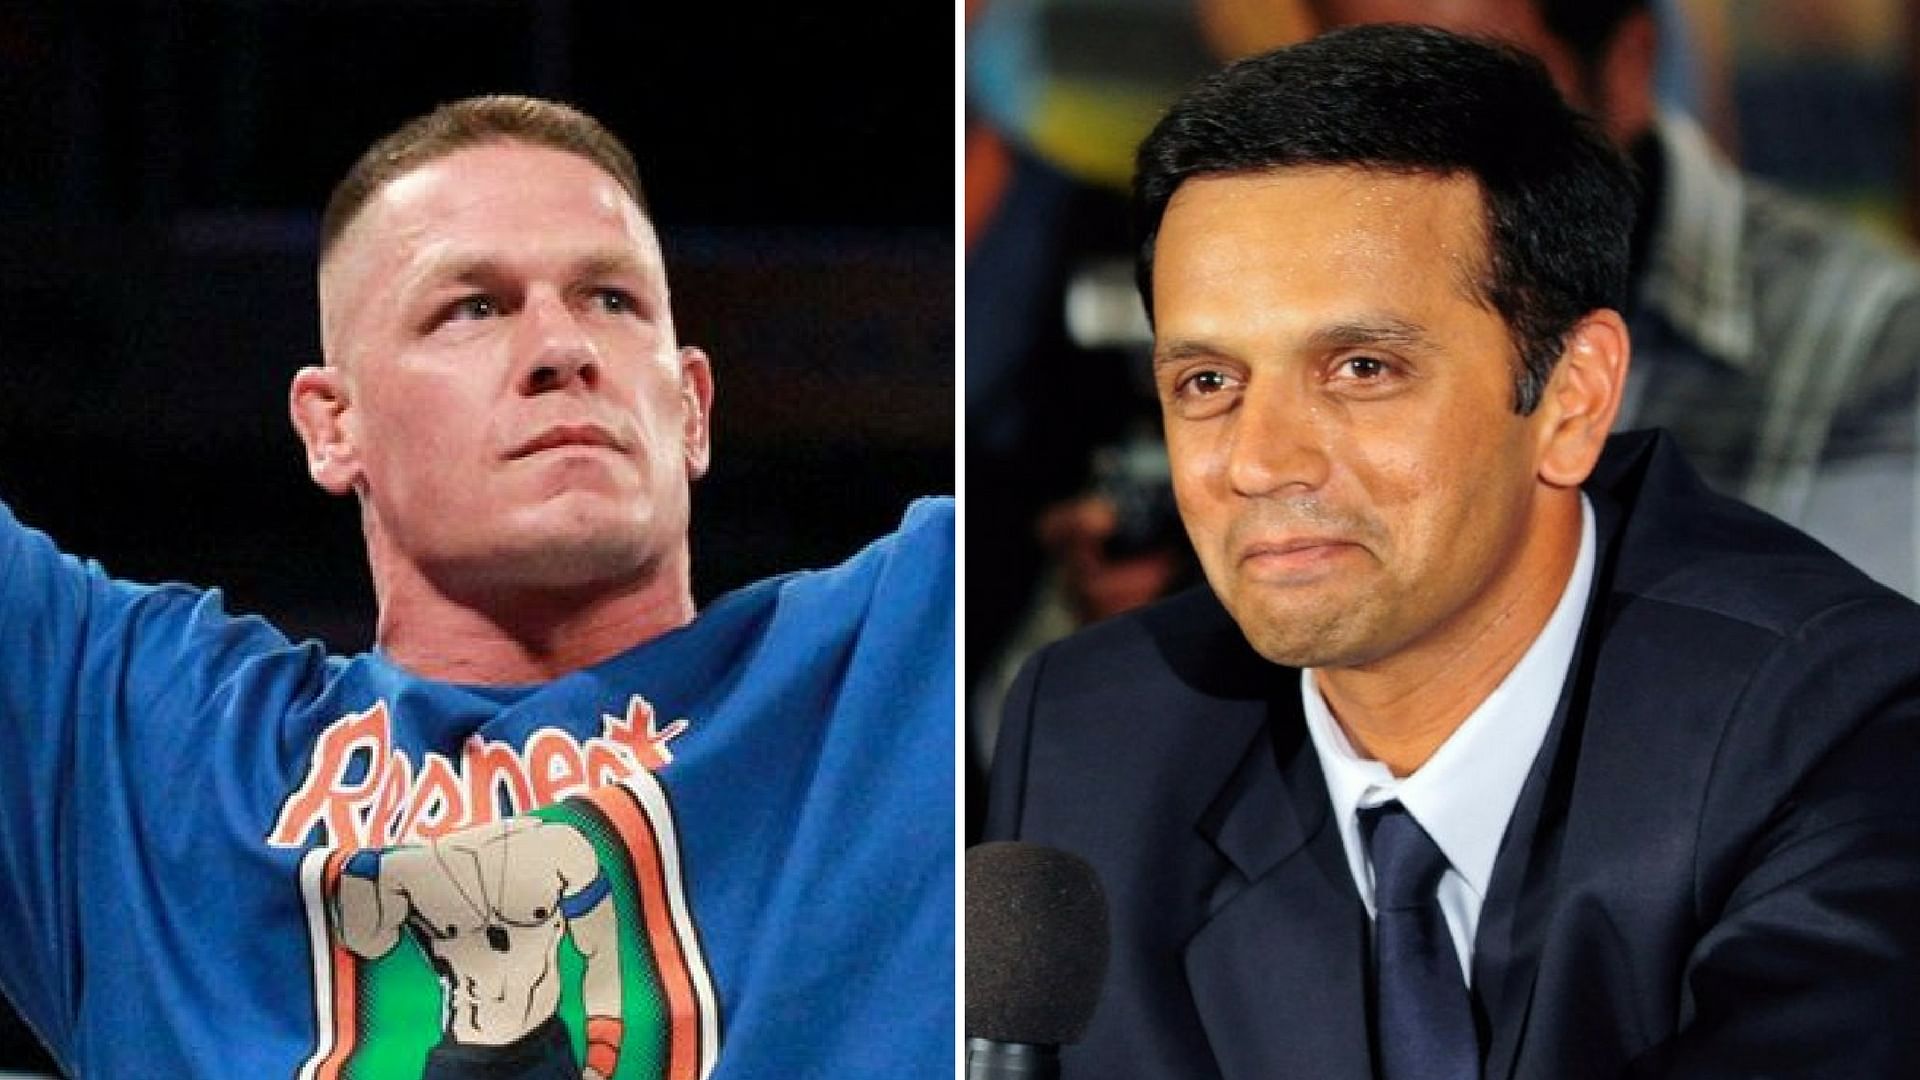 John Cena posted a quote of Rahul Dravid on Instagram.